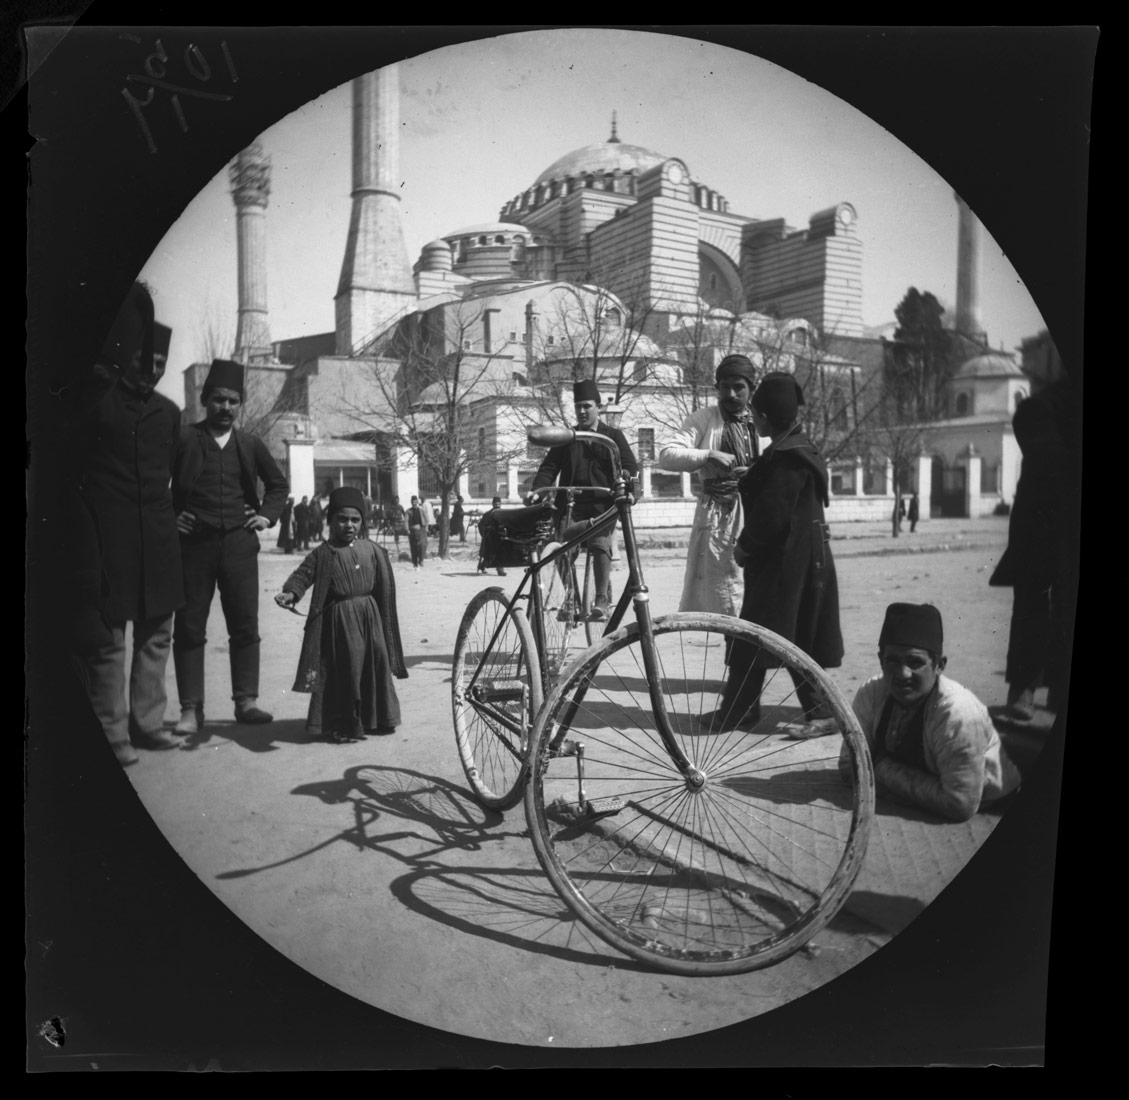 William Sachtleben’s Humber bicycle at rest in Constantinople draws a crowd of spectators.  Background: Hagia Sophia and Thomas Allen on his bicycle.  March 21, 1891. Collection of the UCLA Library Special Collections